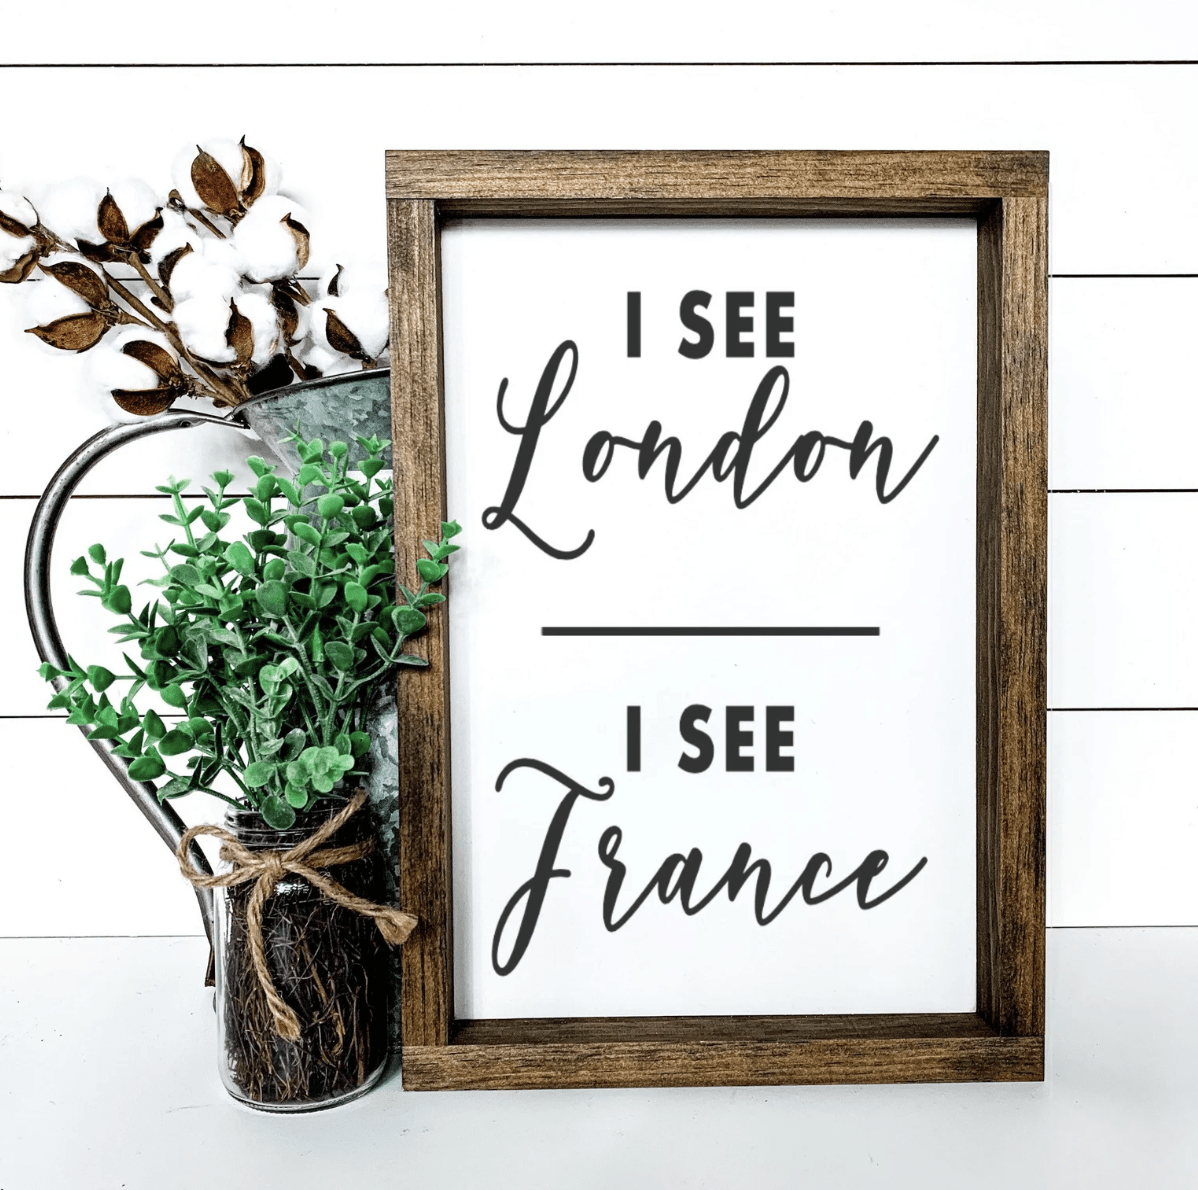 wood frame rustic bathroom sign on white shiplap background with greenery farmhouse